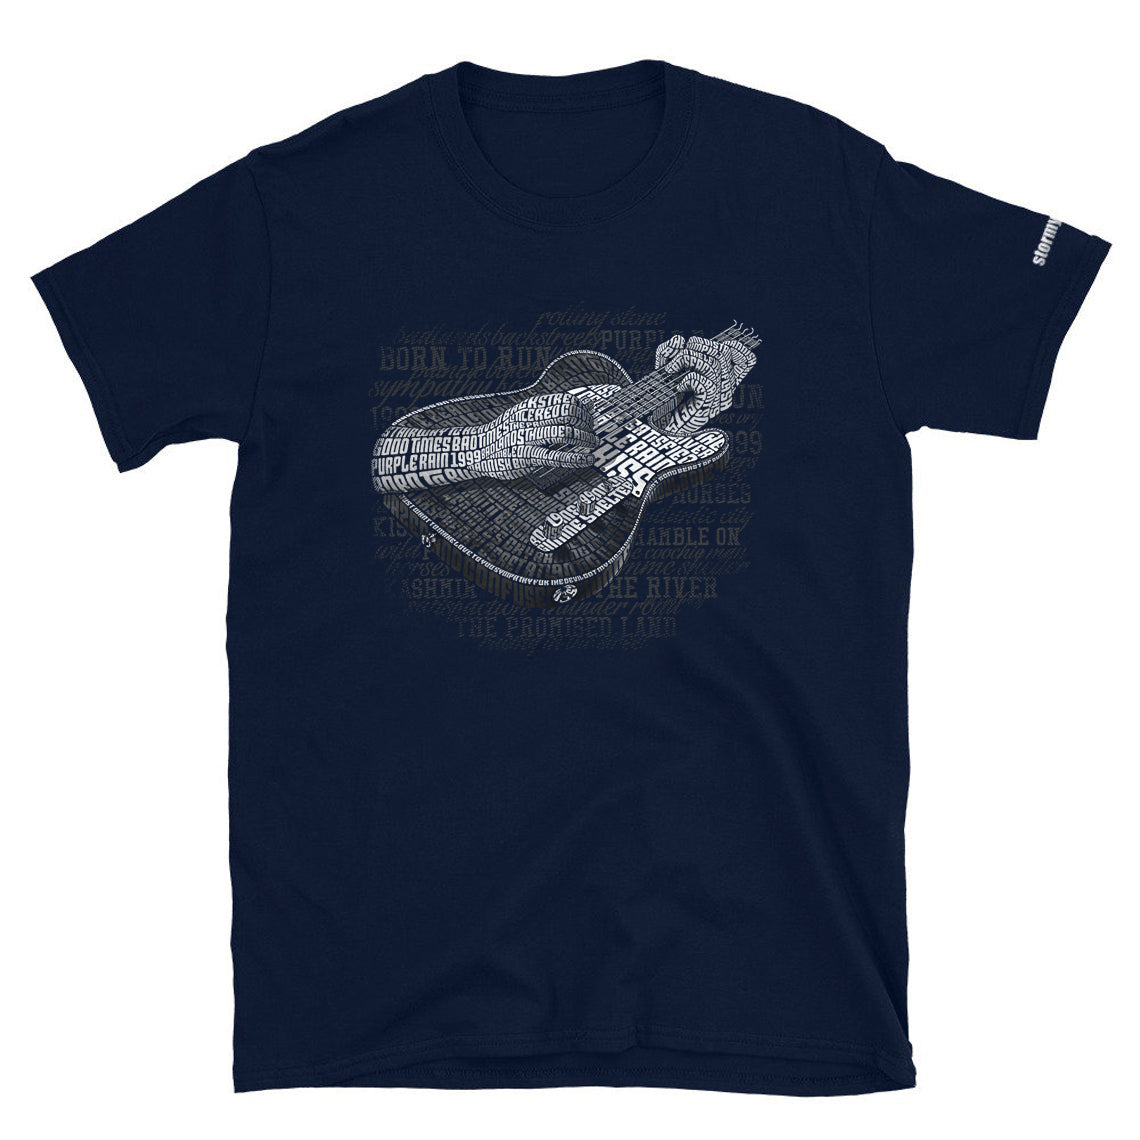 Classic Telecaster Electric Guitar on Short-Sleeve Unisex T-Shirt